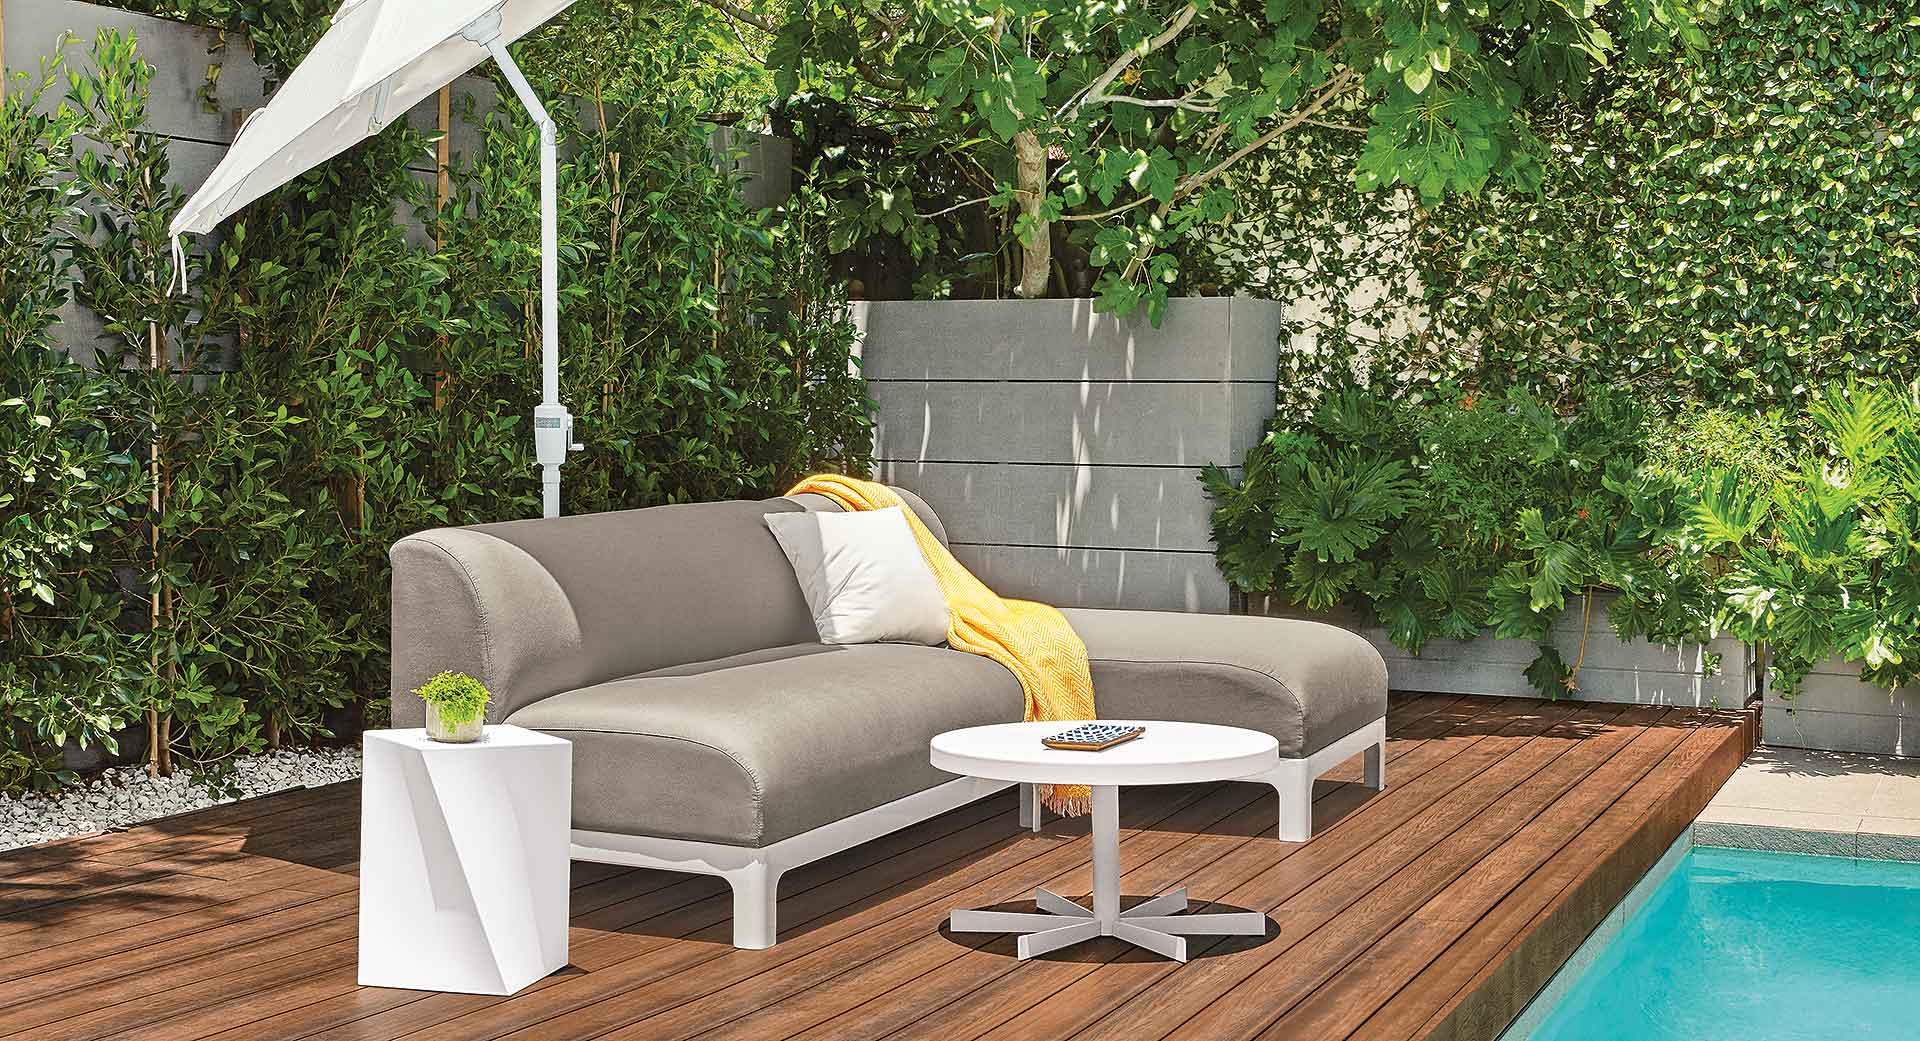 Crescent outdoor sofa/chaise with Gehry cube end table